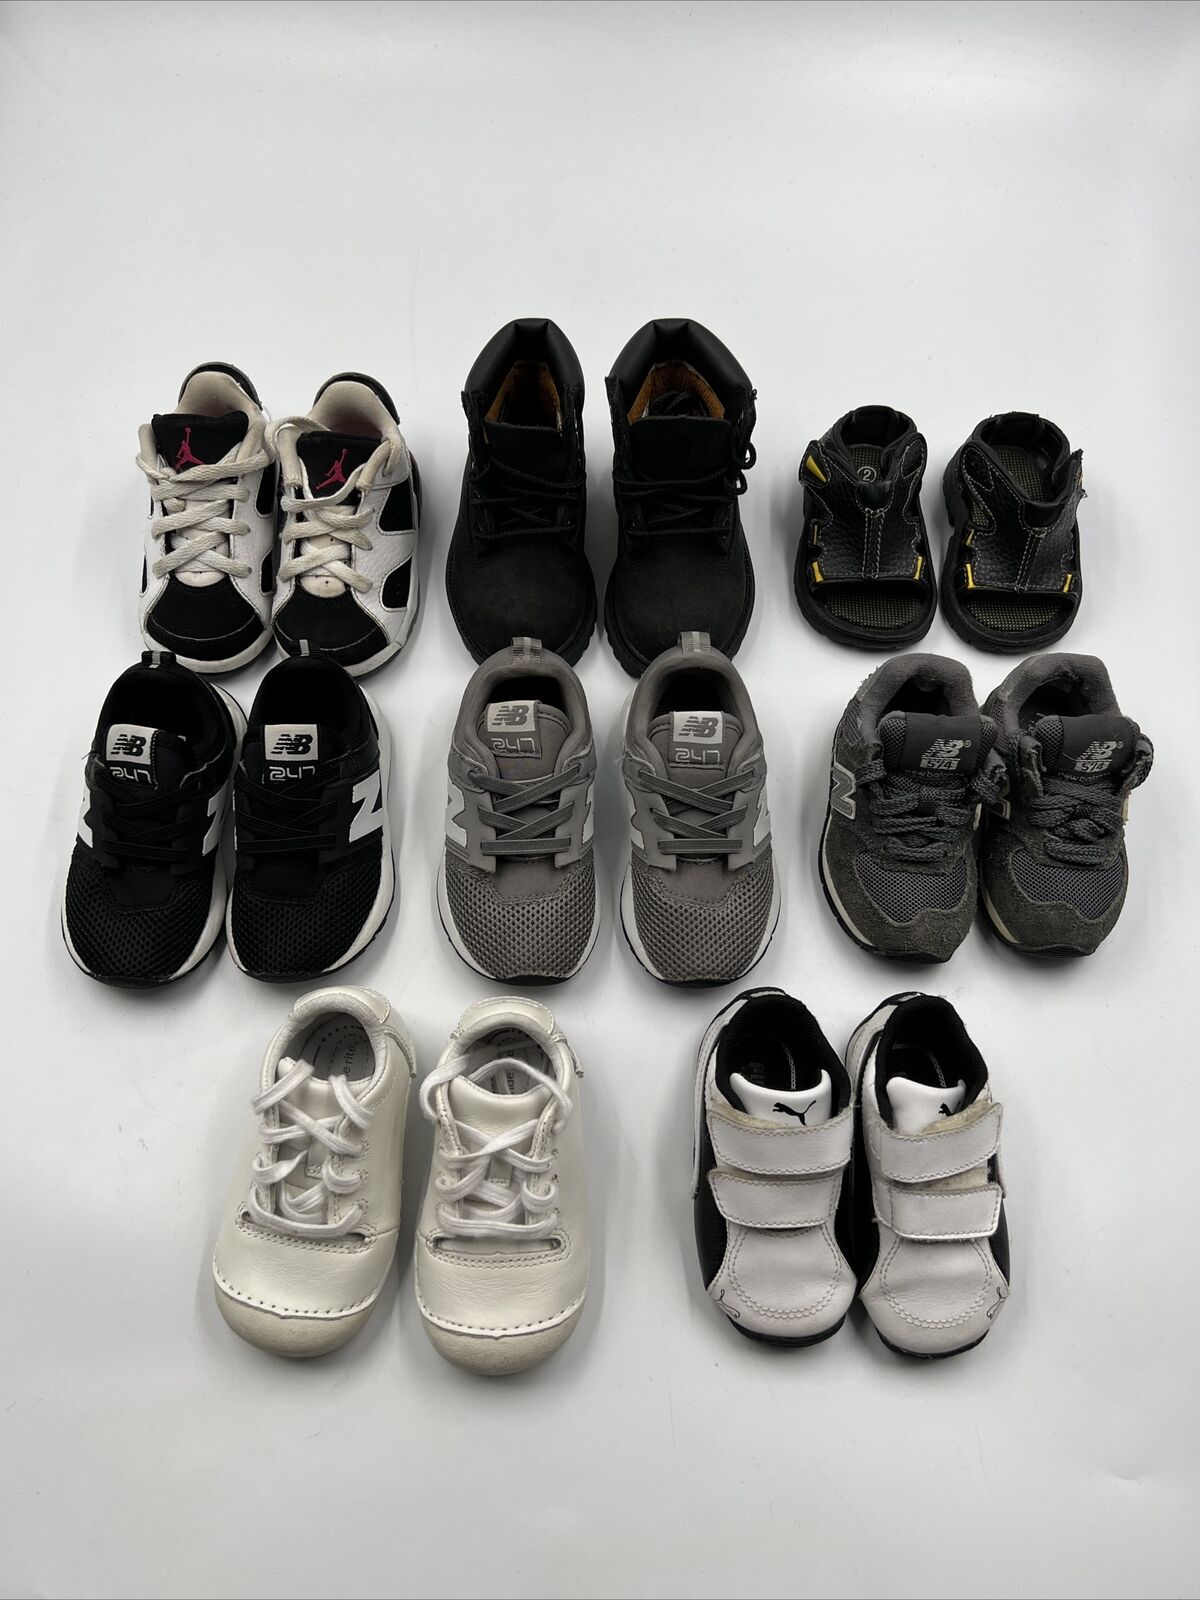 Lot Of Baby Boy Infant Shoes 8 Pairs In Total Jordan’s Timberlands New Balance